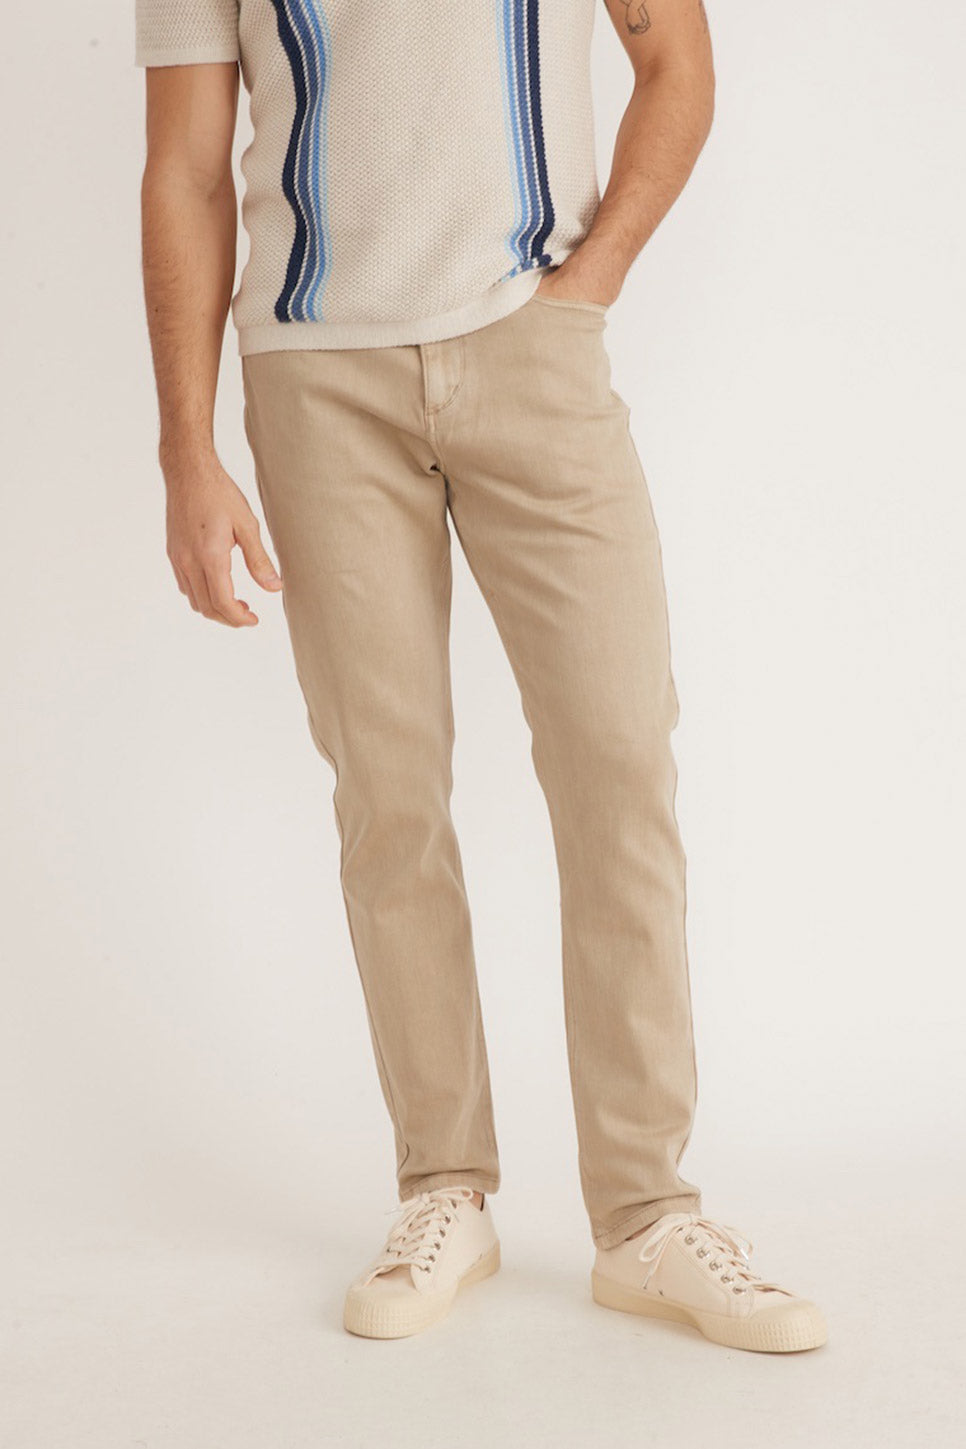 Marine Layer - 5 Pkt Twill Pant Athletic Fit - Khaki - Front